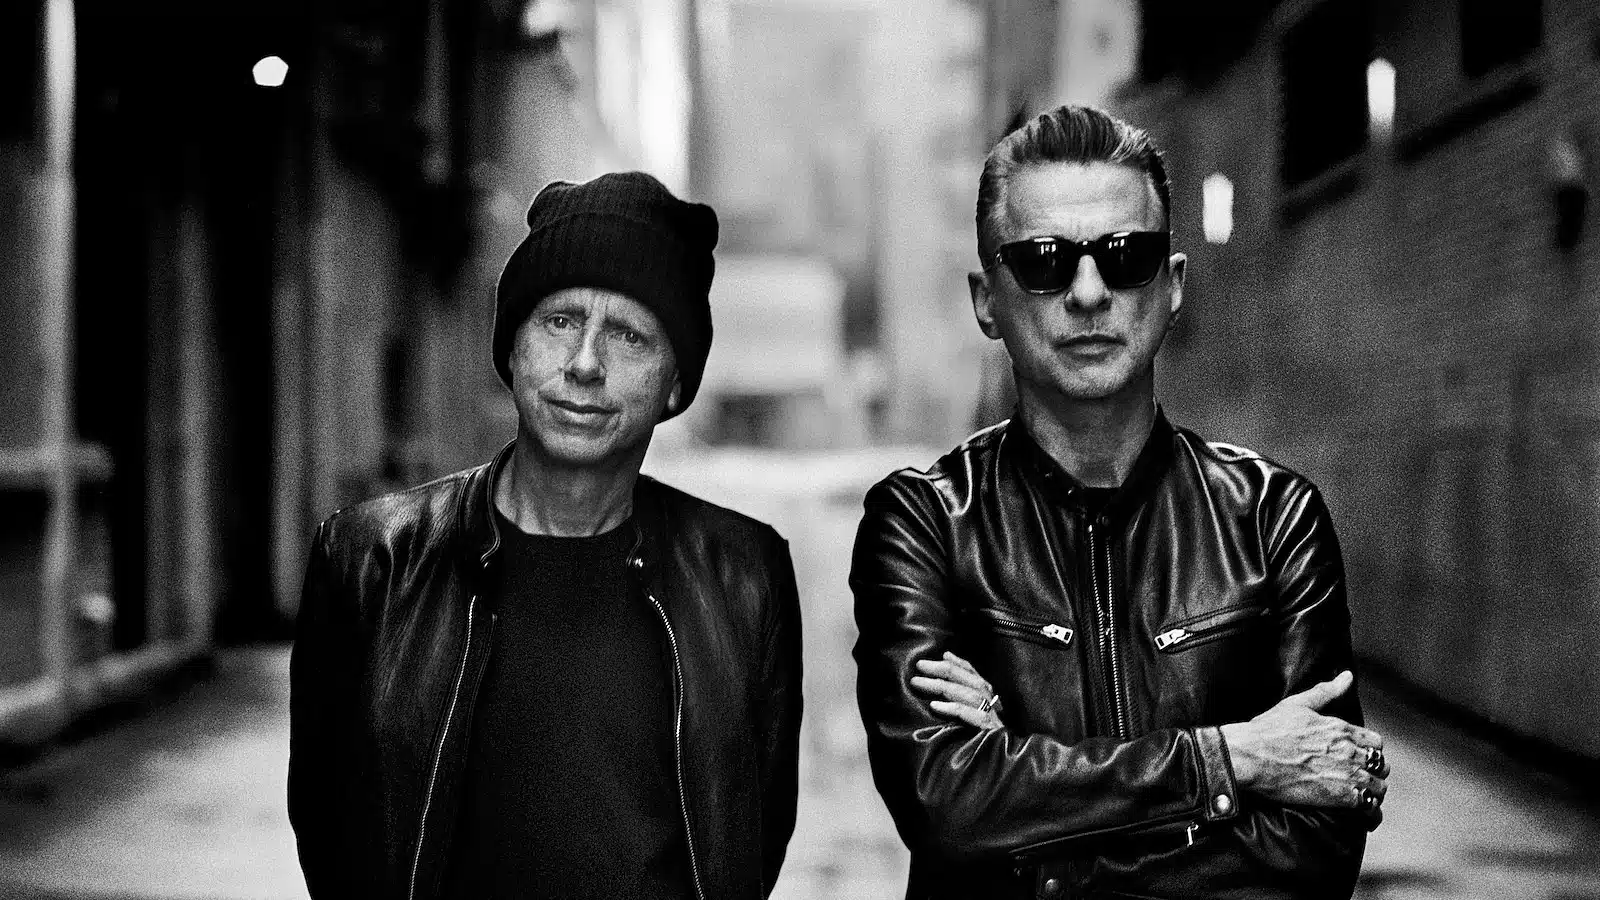 Depeche Mode Songs Ranked Worst to Best